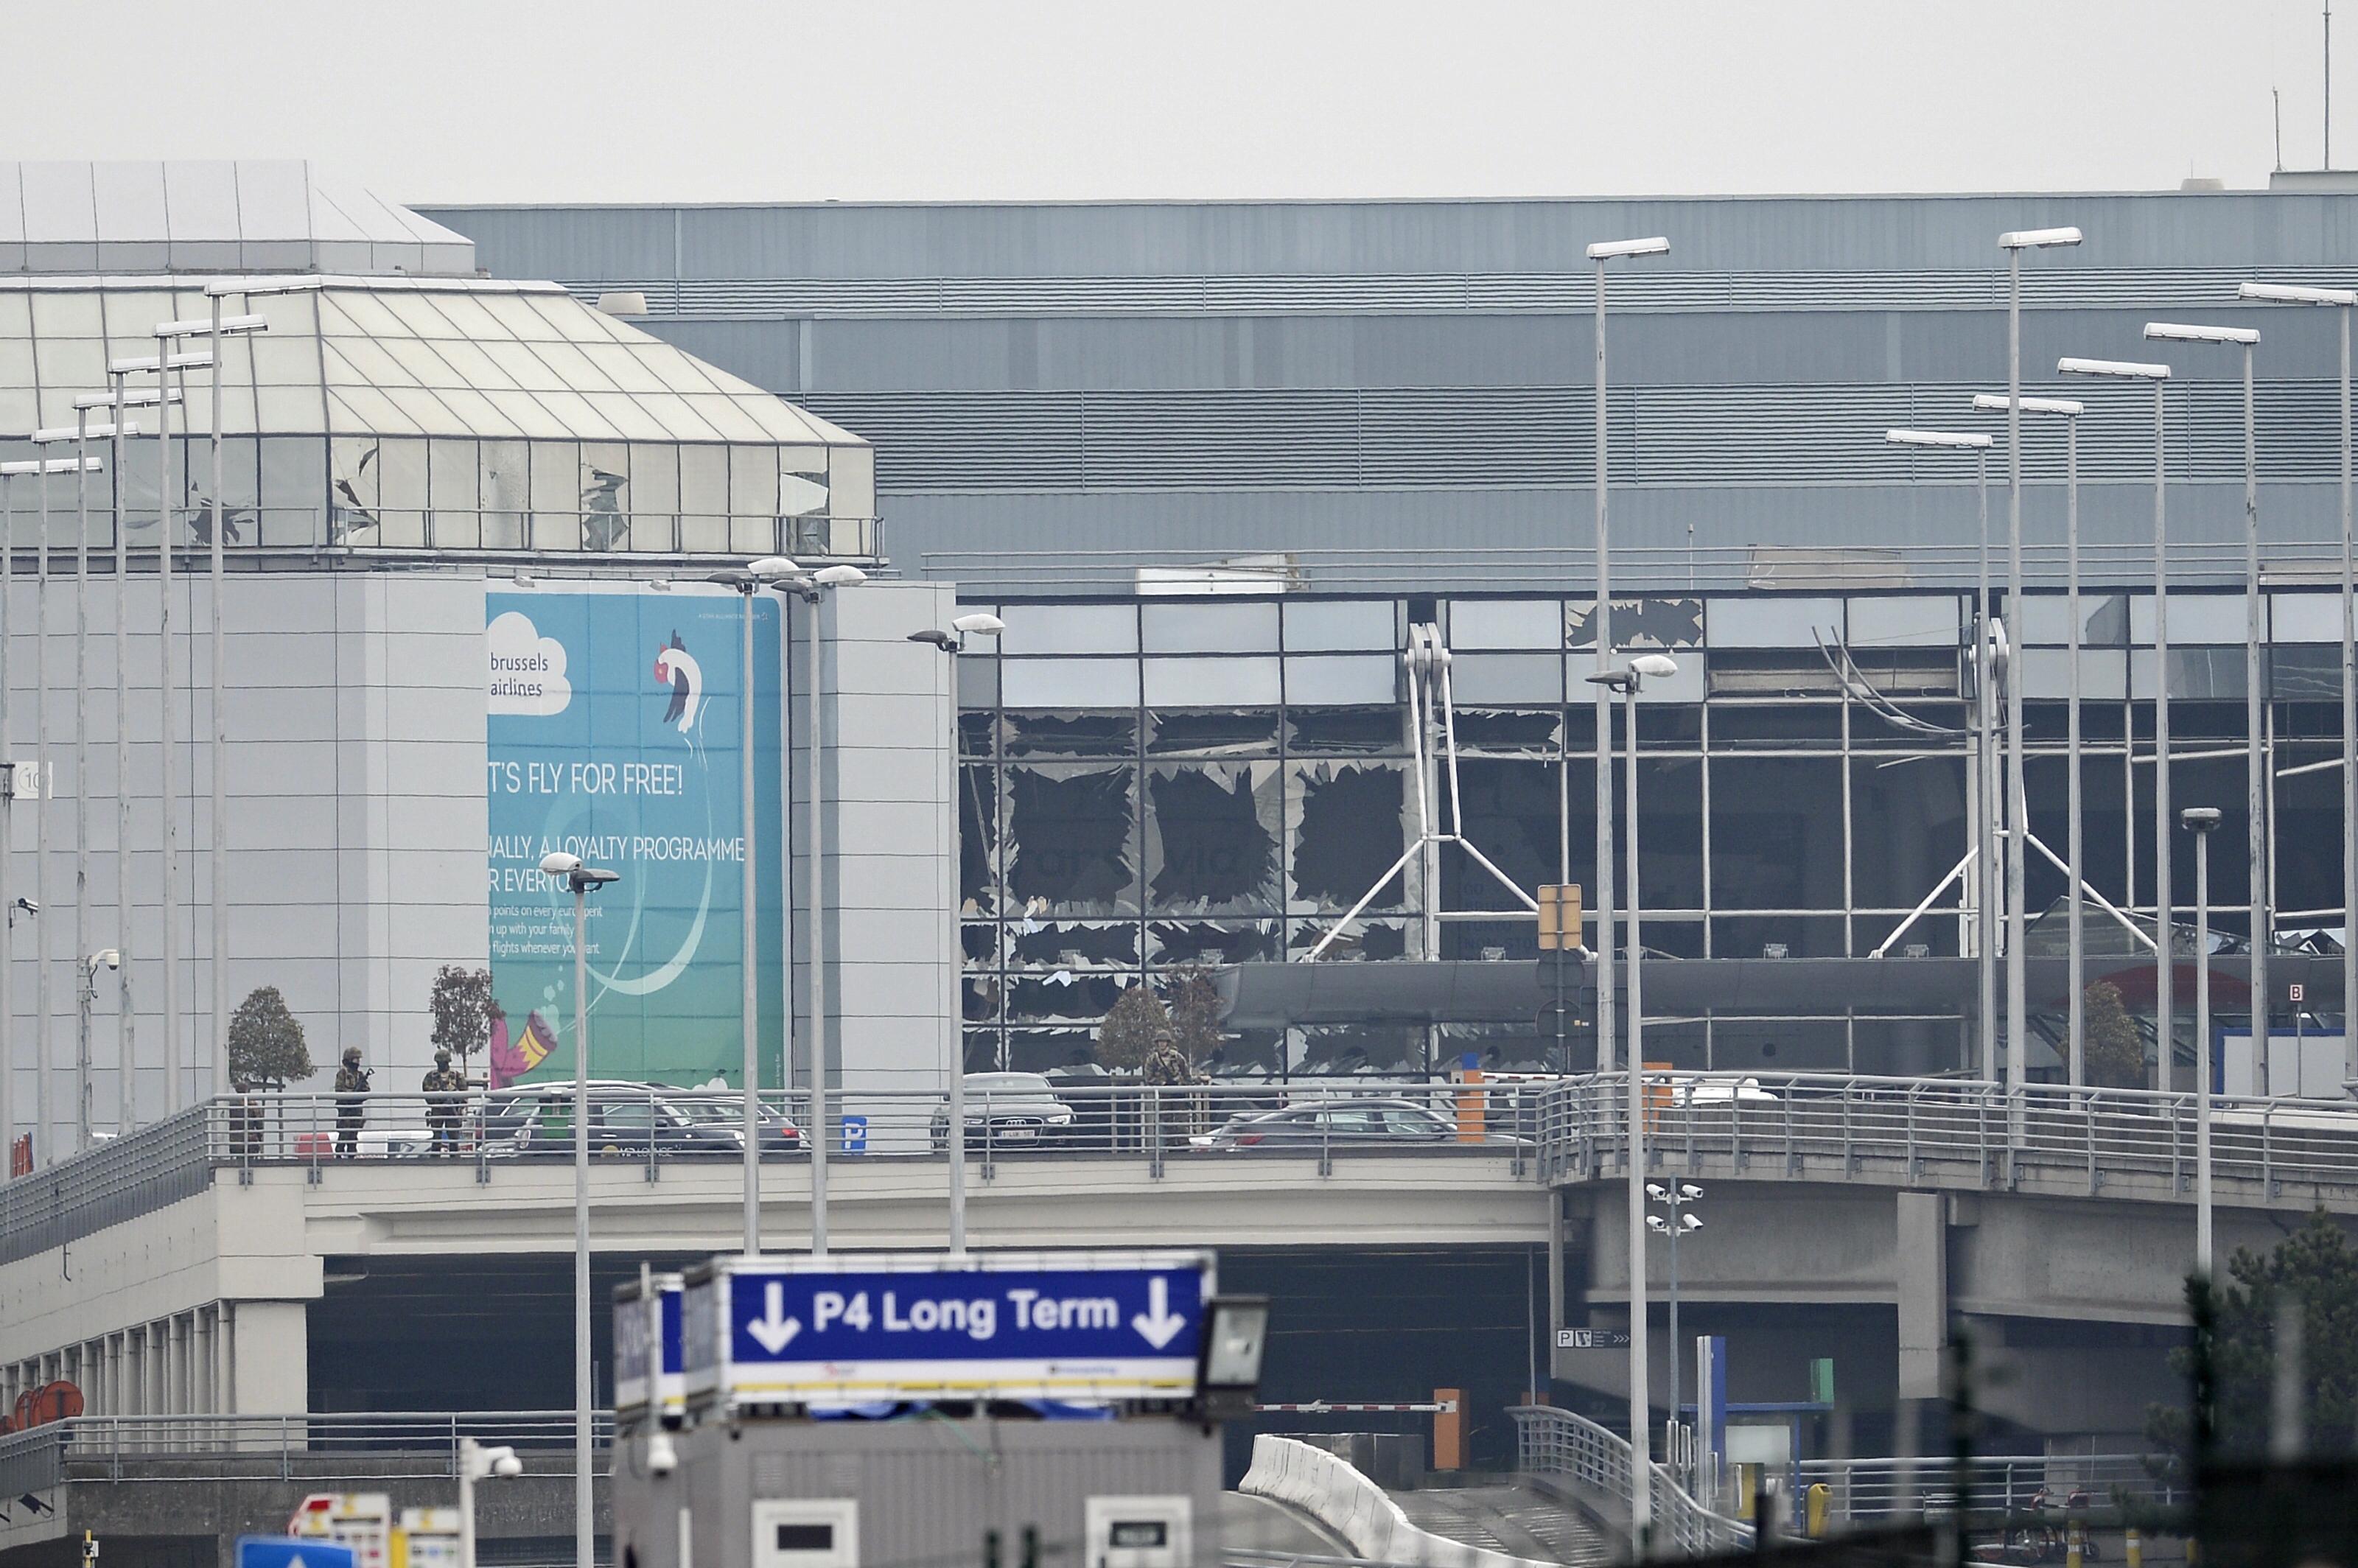 A picture shows damage to the facade of Brussels Airport, in Zaventem, on March 2016 after two explosions in the airport. Belgian firefighters said there were at least 21 dead after "enormous" blasts hit Brussels airport and the city's metro system. / AFP / BELGA / DIRK WAEM / Belgium OUT